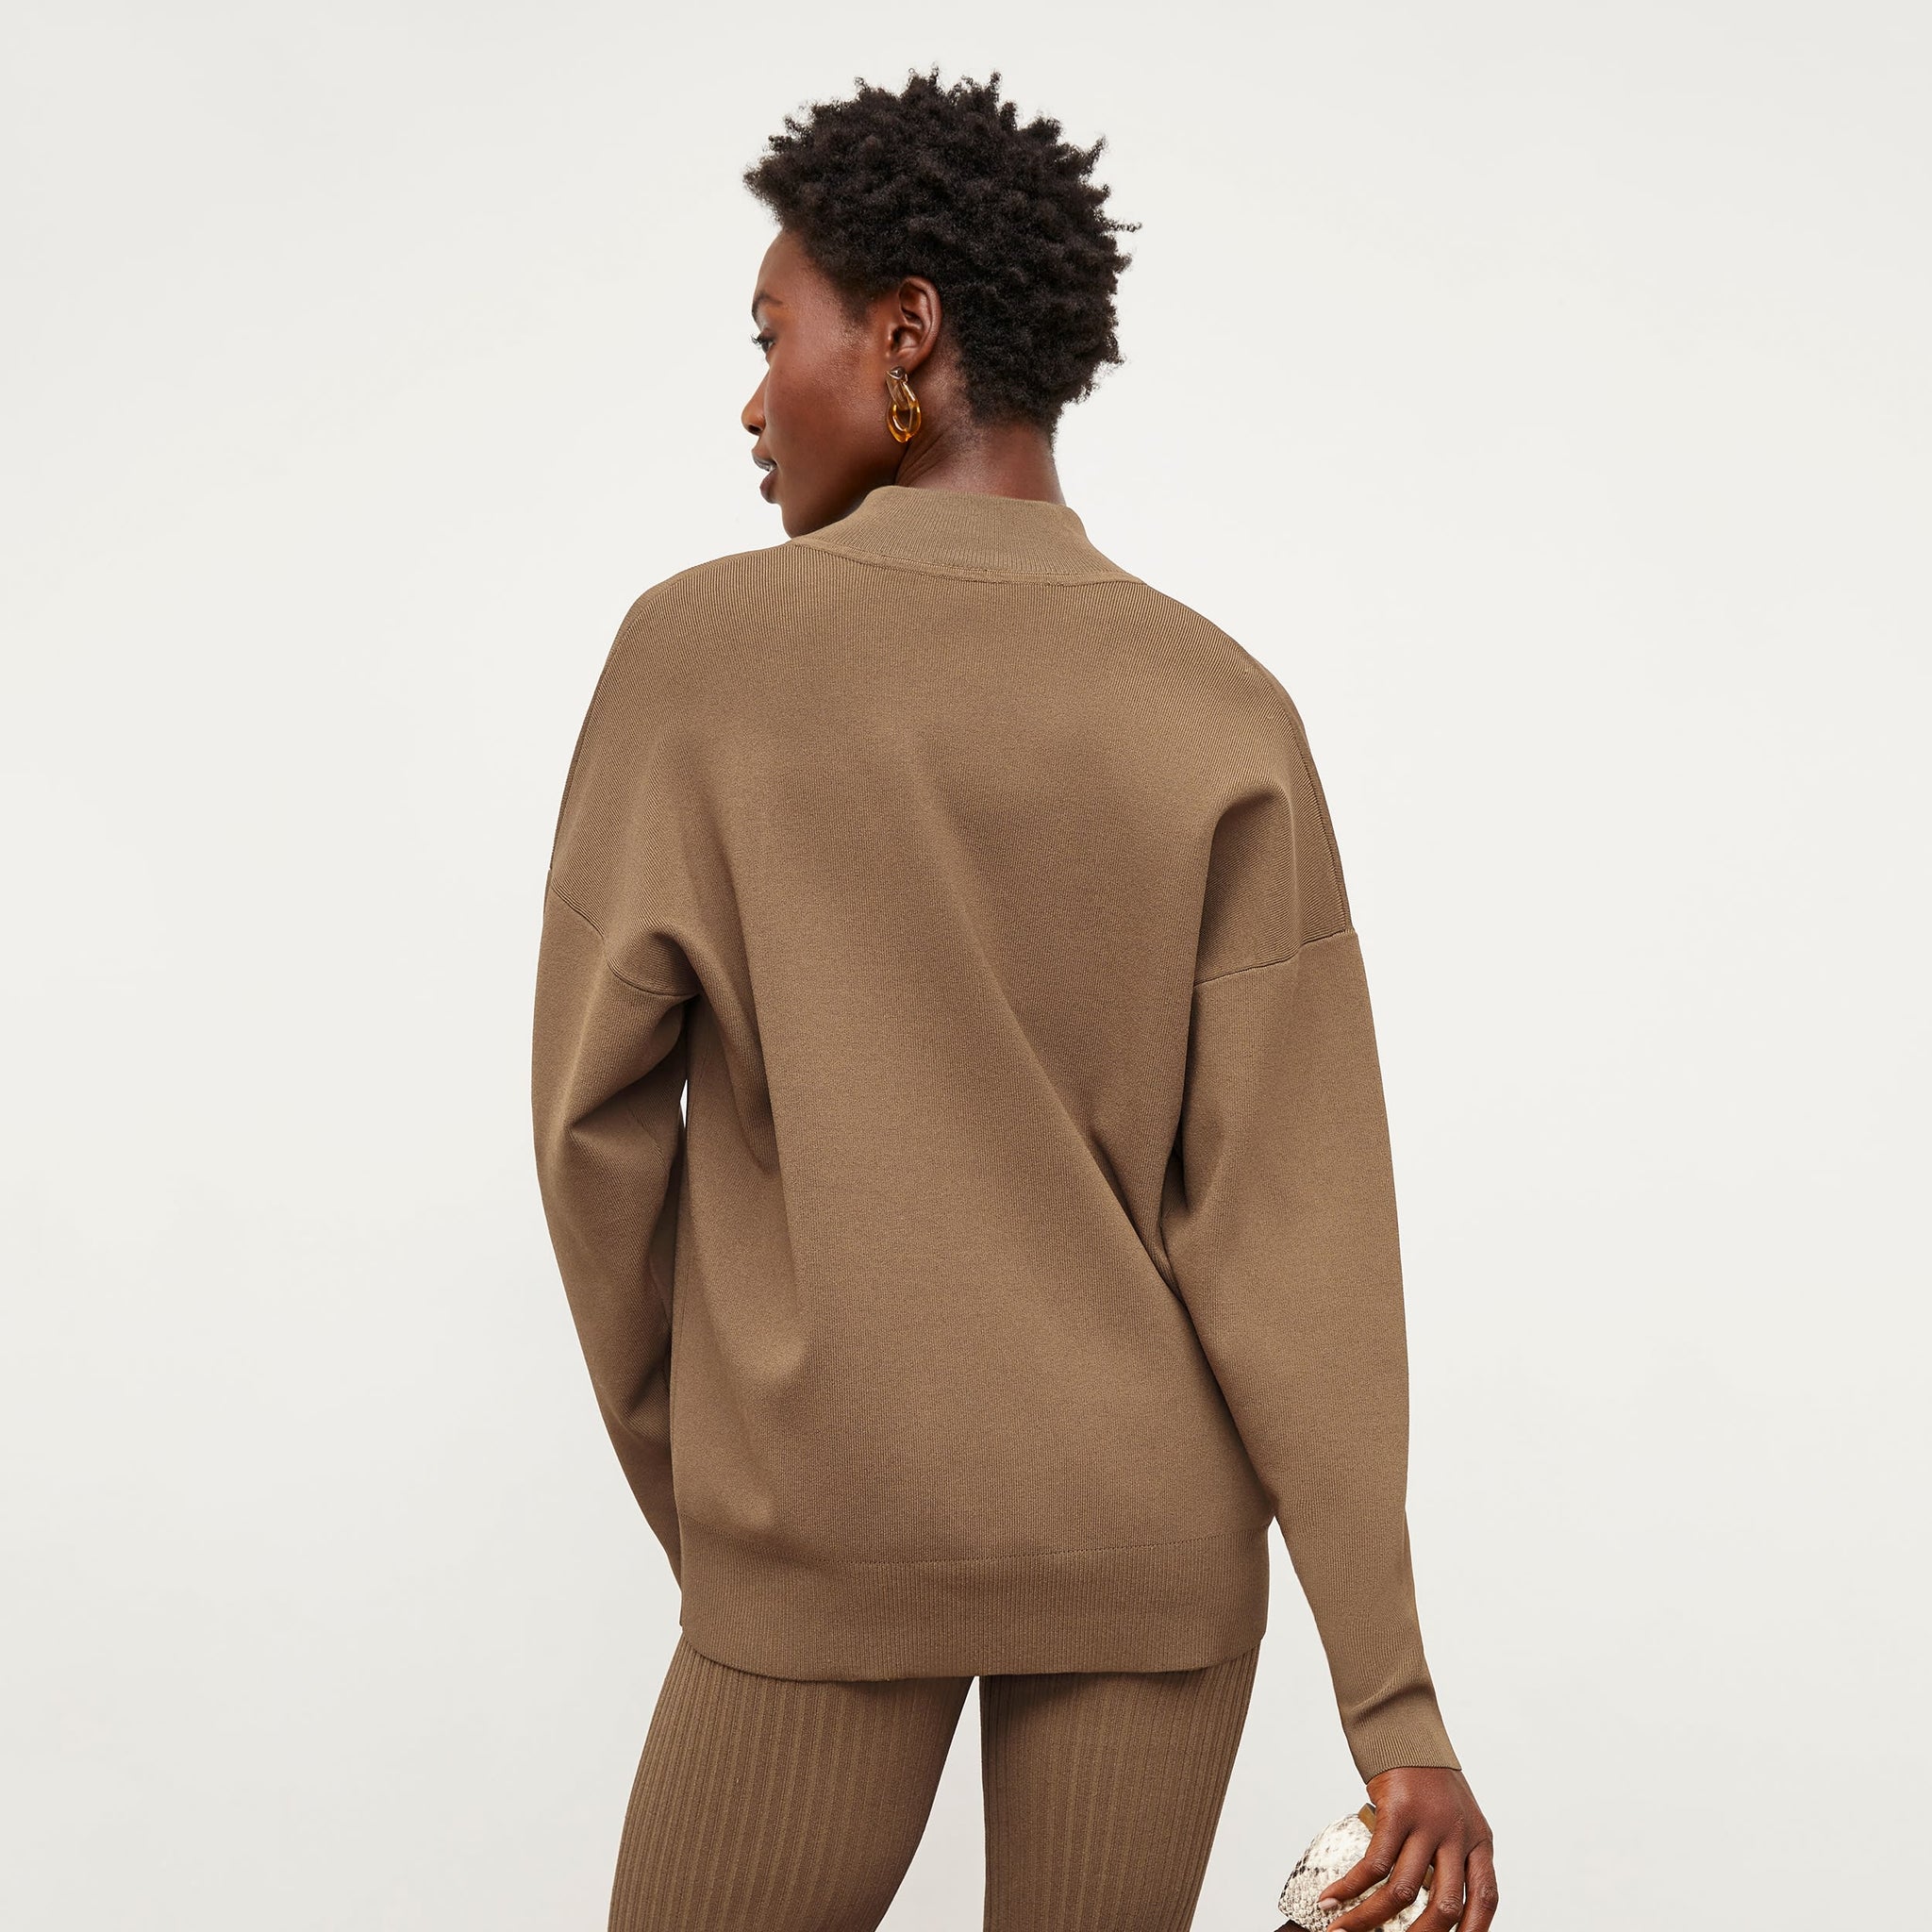 Back image of a woman standing wearing the Athens Half Zip—Jardigan Knit in Light Bronze